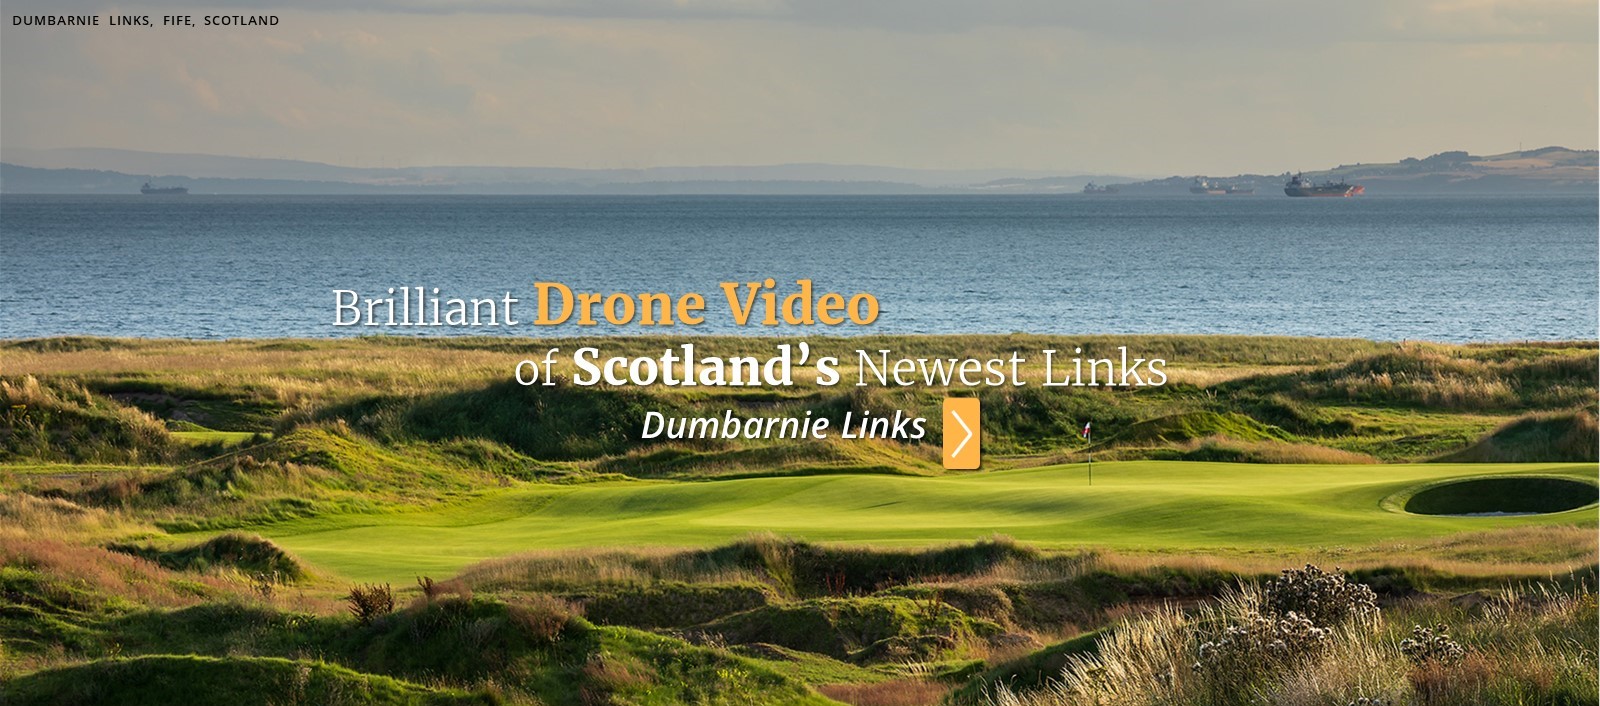 Watch VIDEO - Act Now & Play the Old Course This Year! - PerryGolf.com